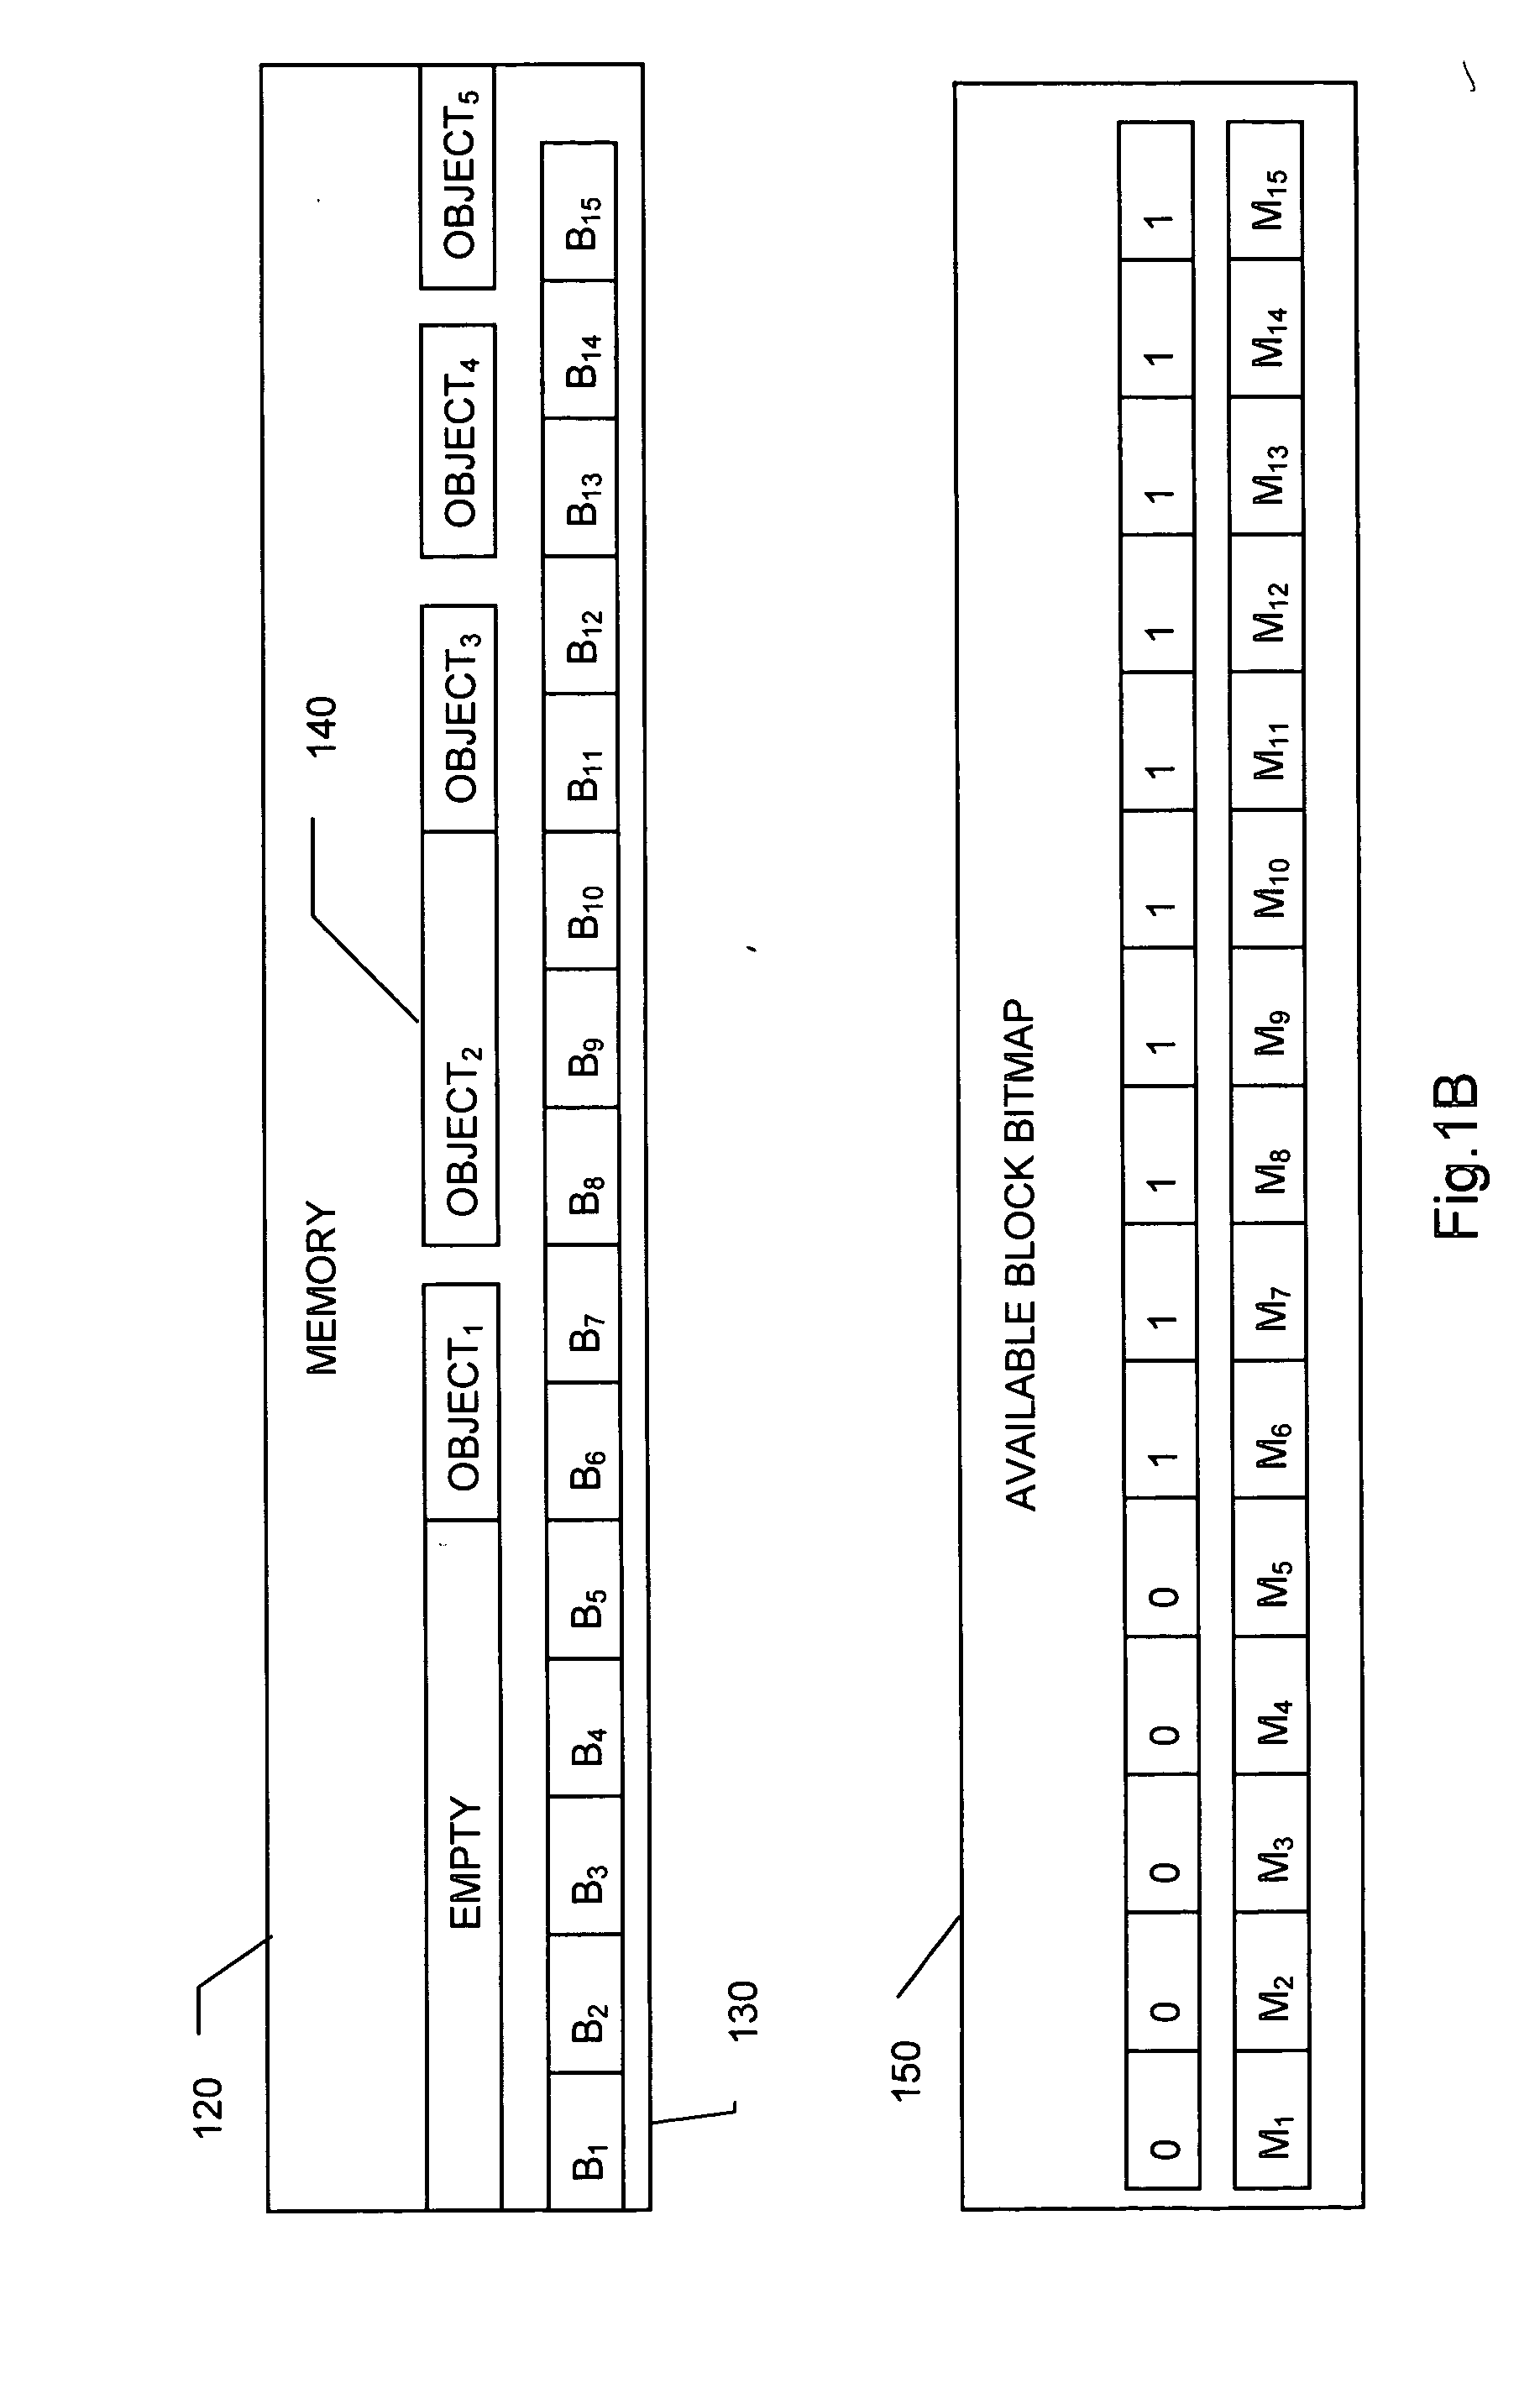 Relative positioning and access of memory objects